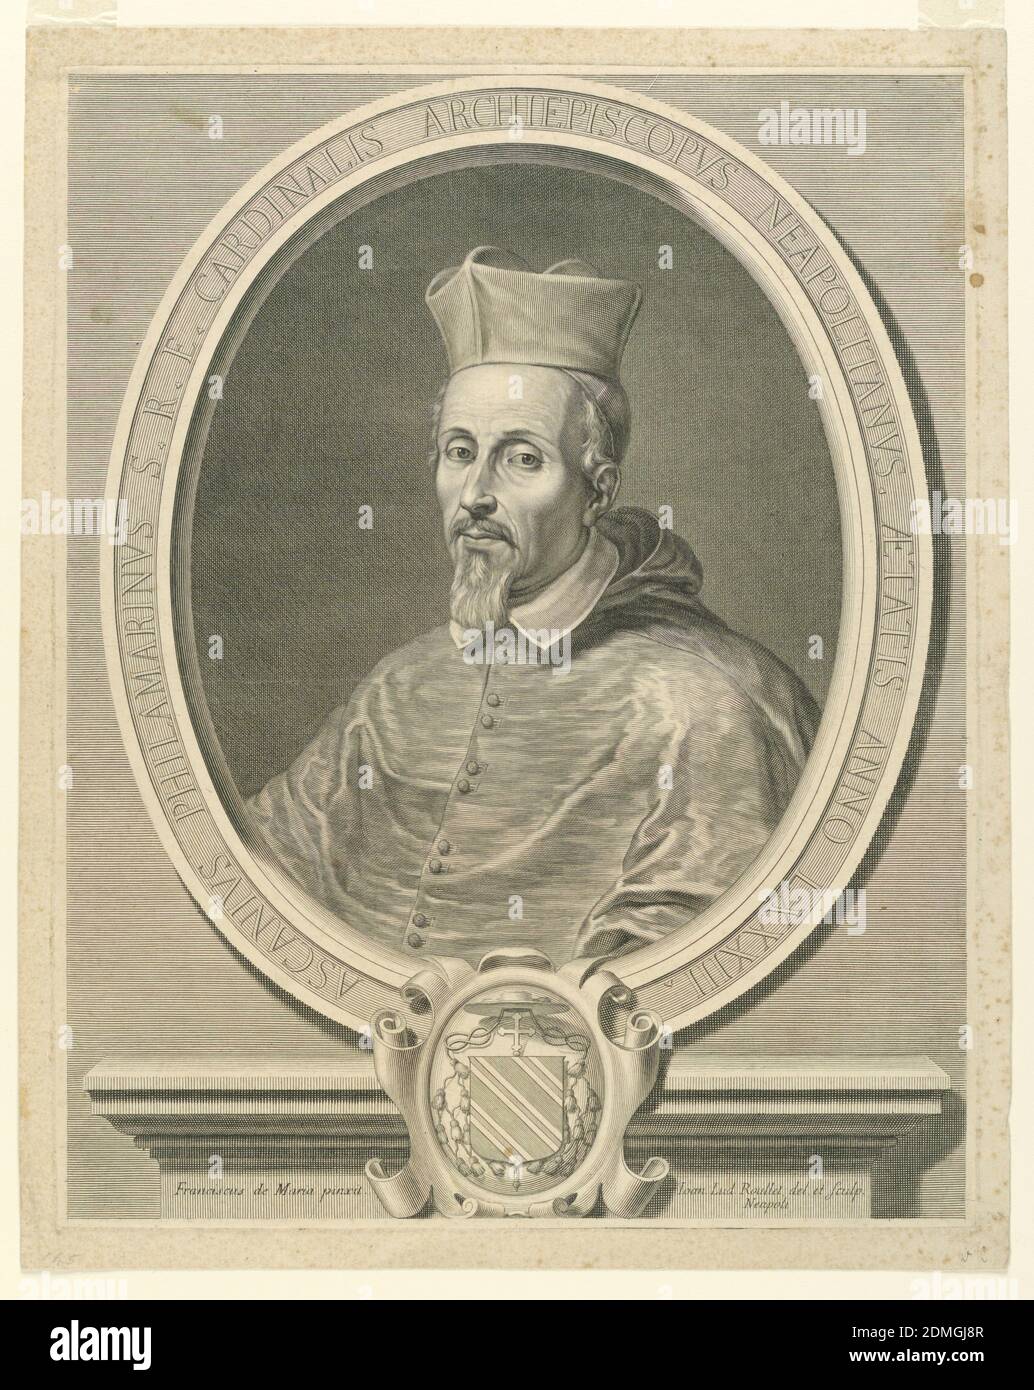 Portrait of Cardinal Ascanius Philamarinus, Jean Louis Roullet, French, 1645 - 1699, Francesco di Maria, Italian, 1623 - 1690, Engraving on paper, Half-length portrait in three-quarter view toward left; facing onlooker. Below, coat-of-arms of the sitter., France or Italy, ca. 1670, Print Stock Photo